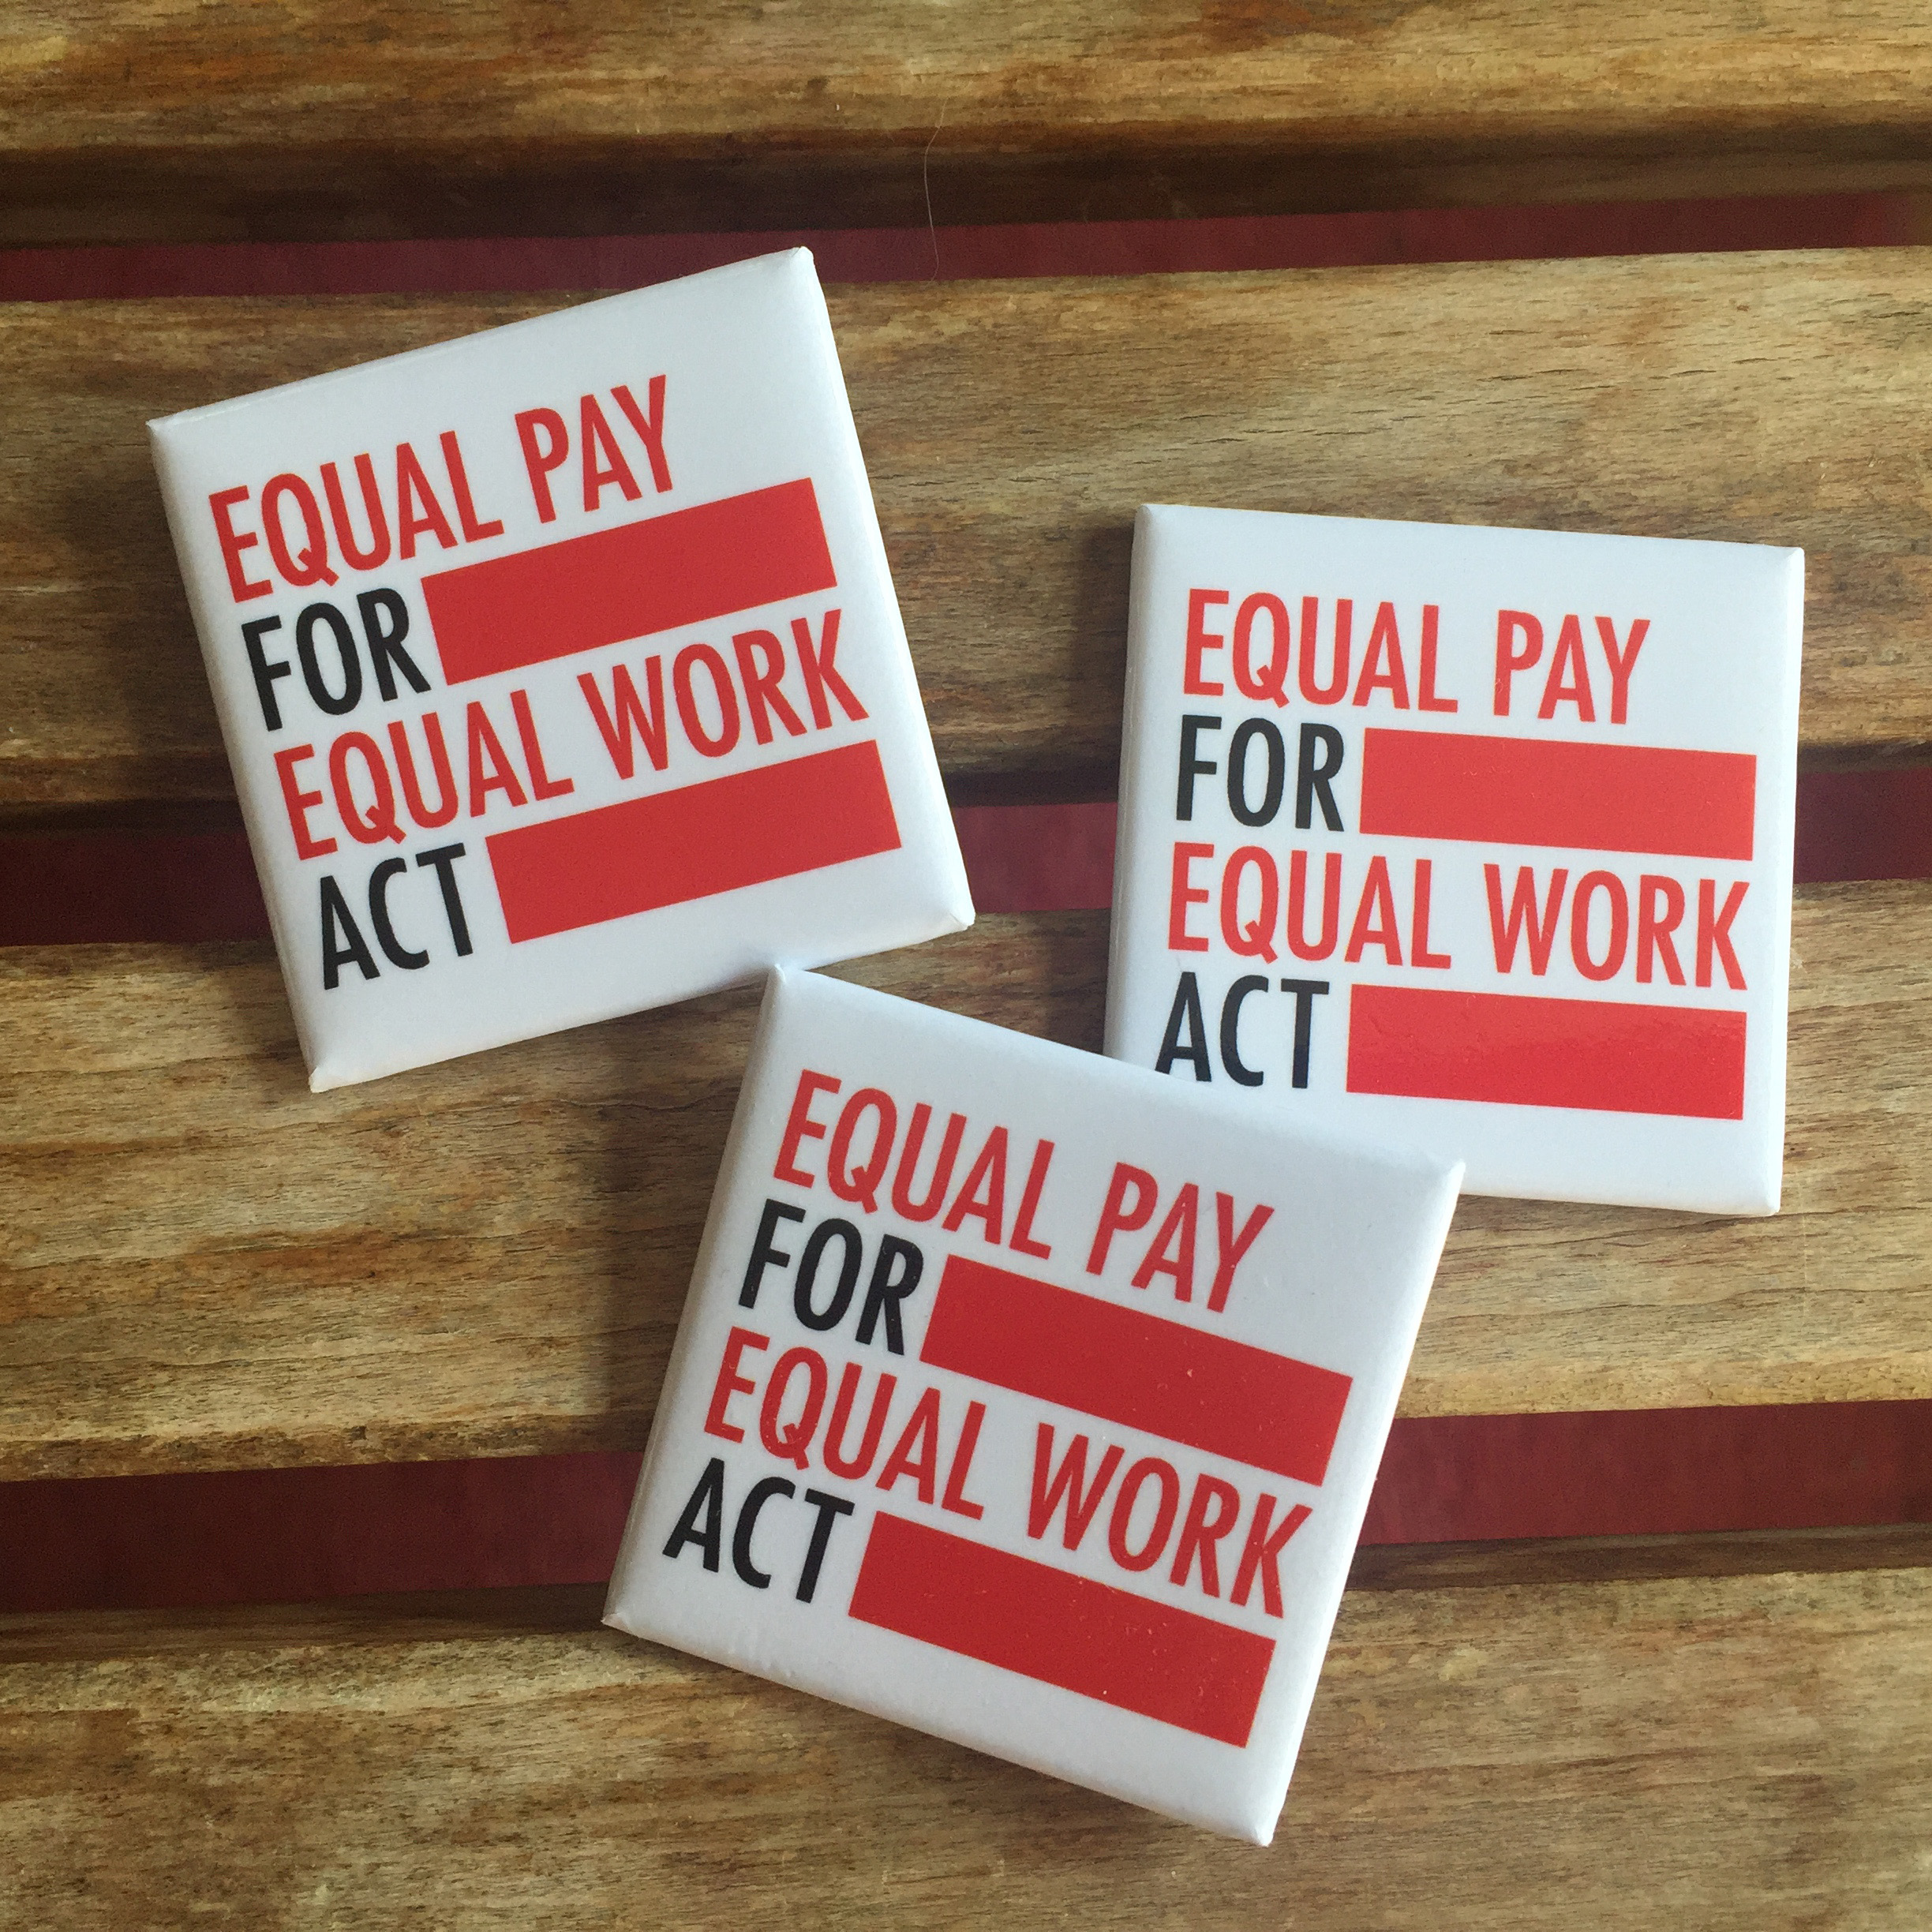 Equal Pay For Equal Work Act LOGO